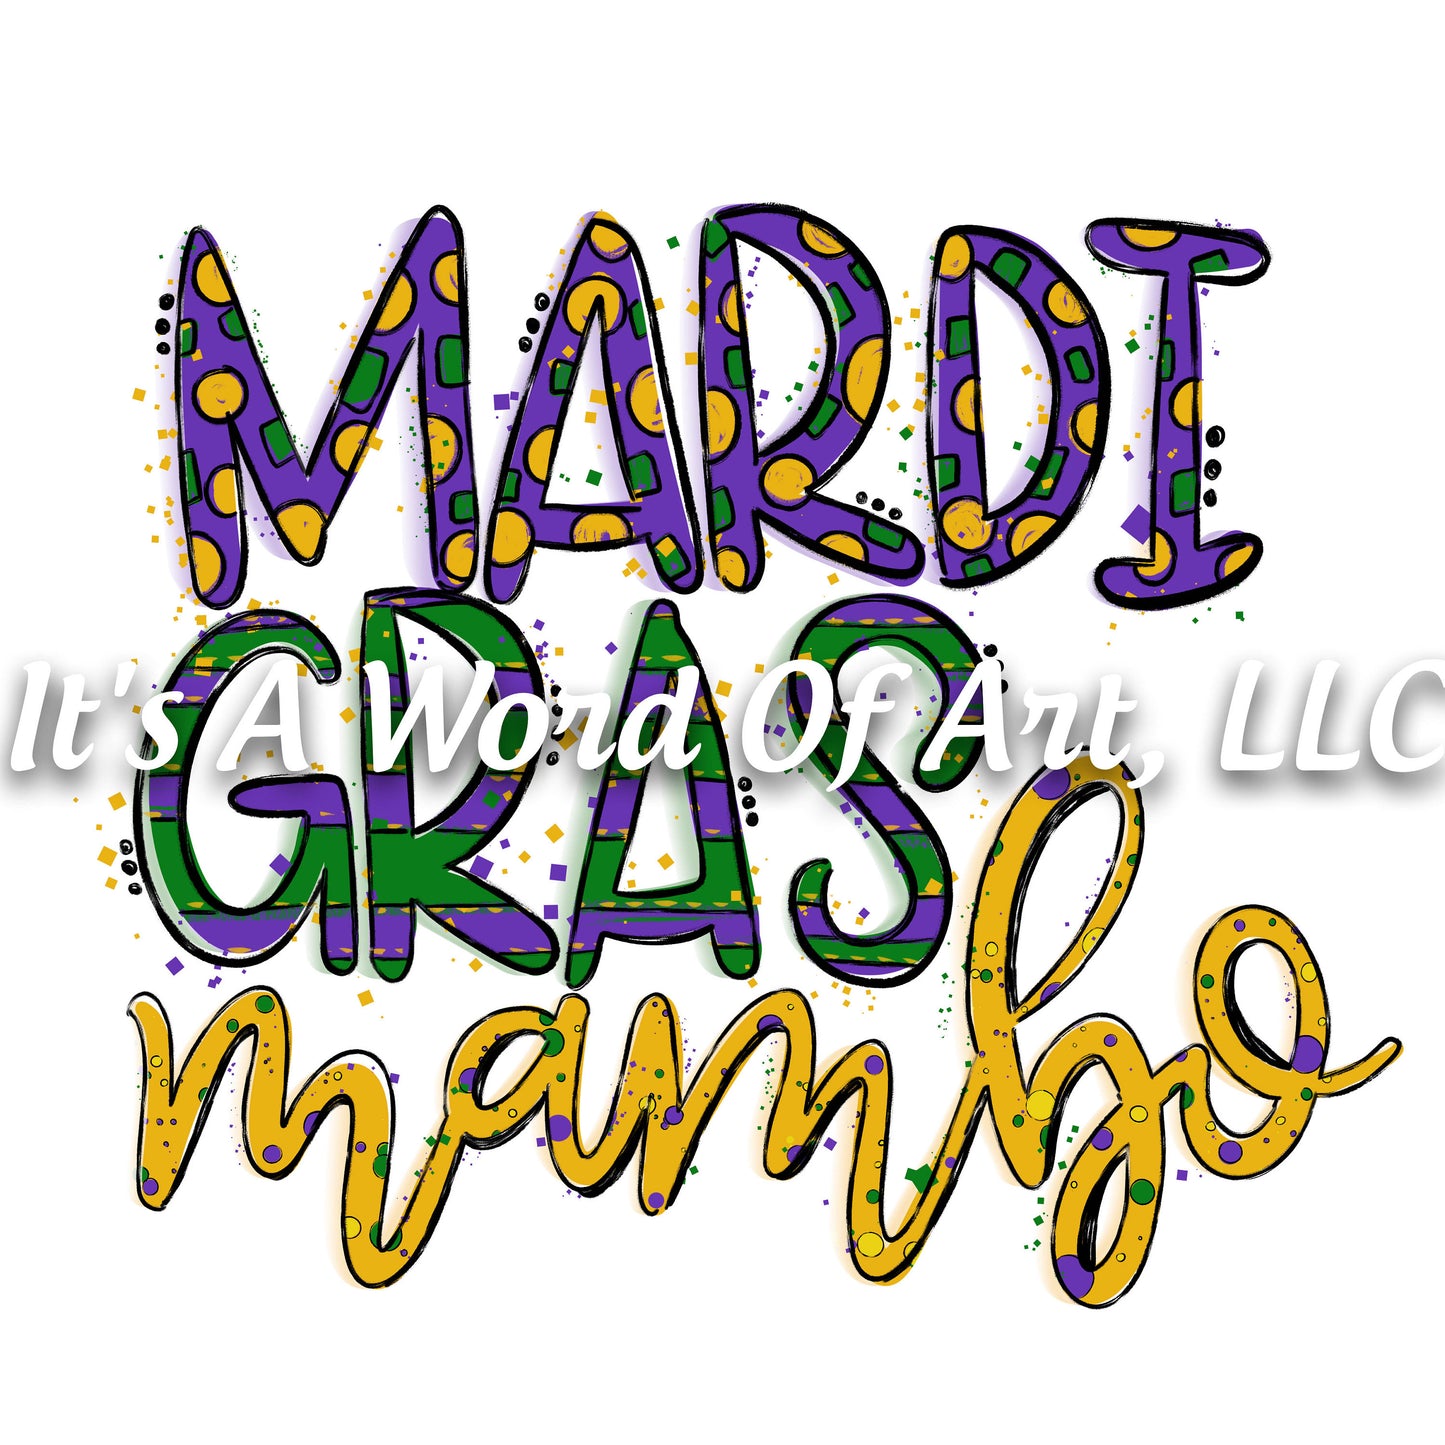 Mardi Gras 24 - Mardi Gras Mambo Doodle Letters - Sublimation Transfer Set/Ready To Press Sublimation Transfer/Sublimation Transfer